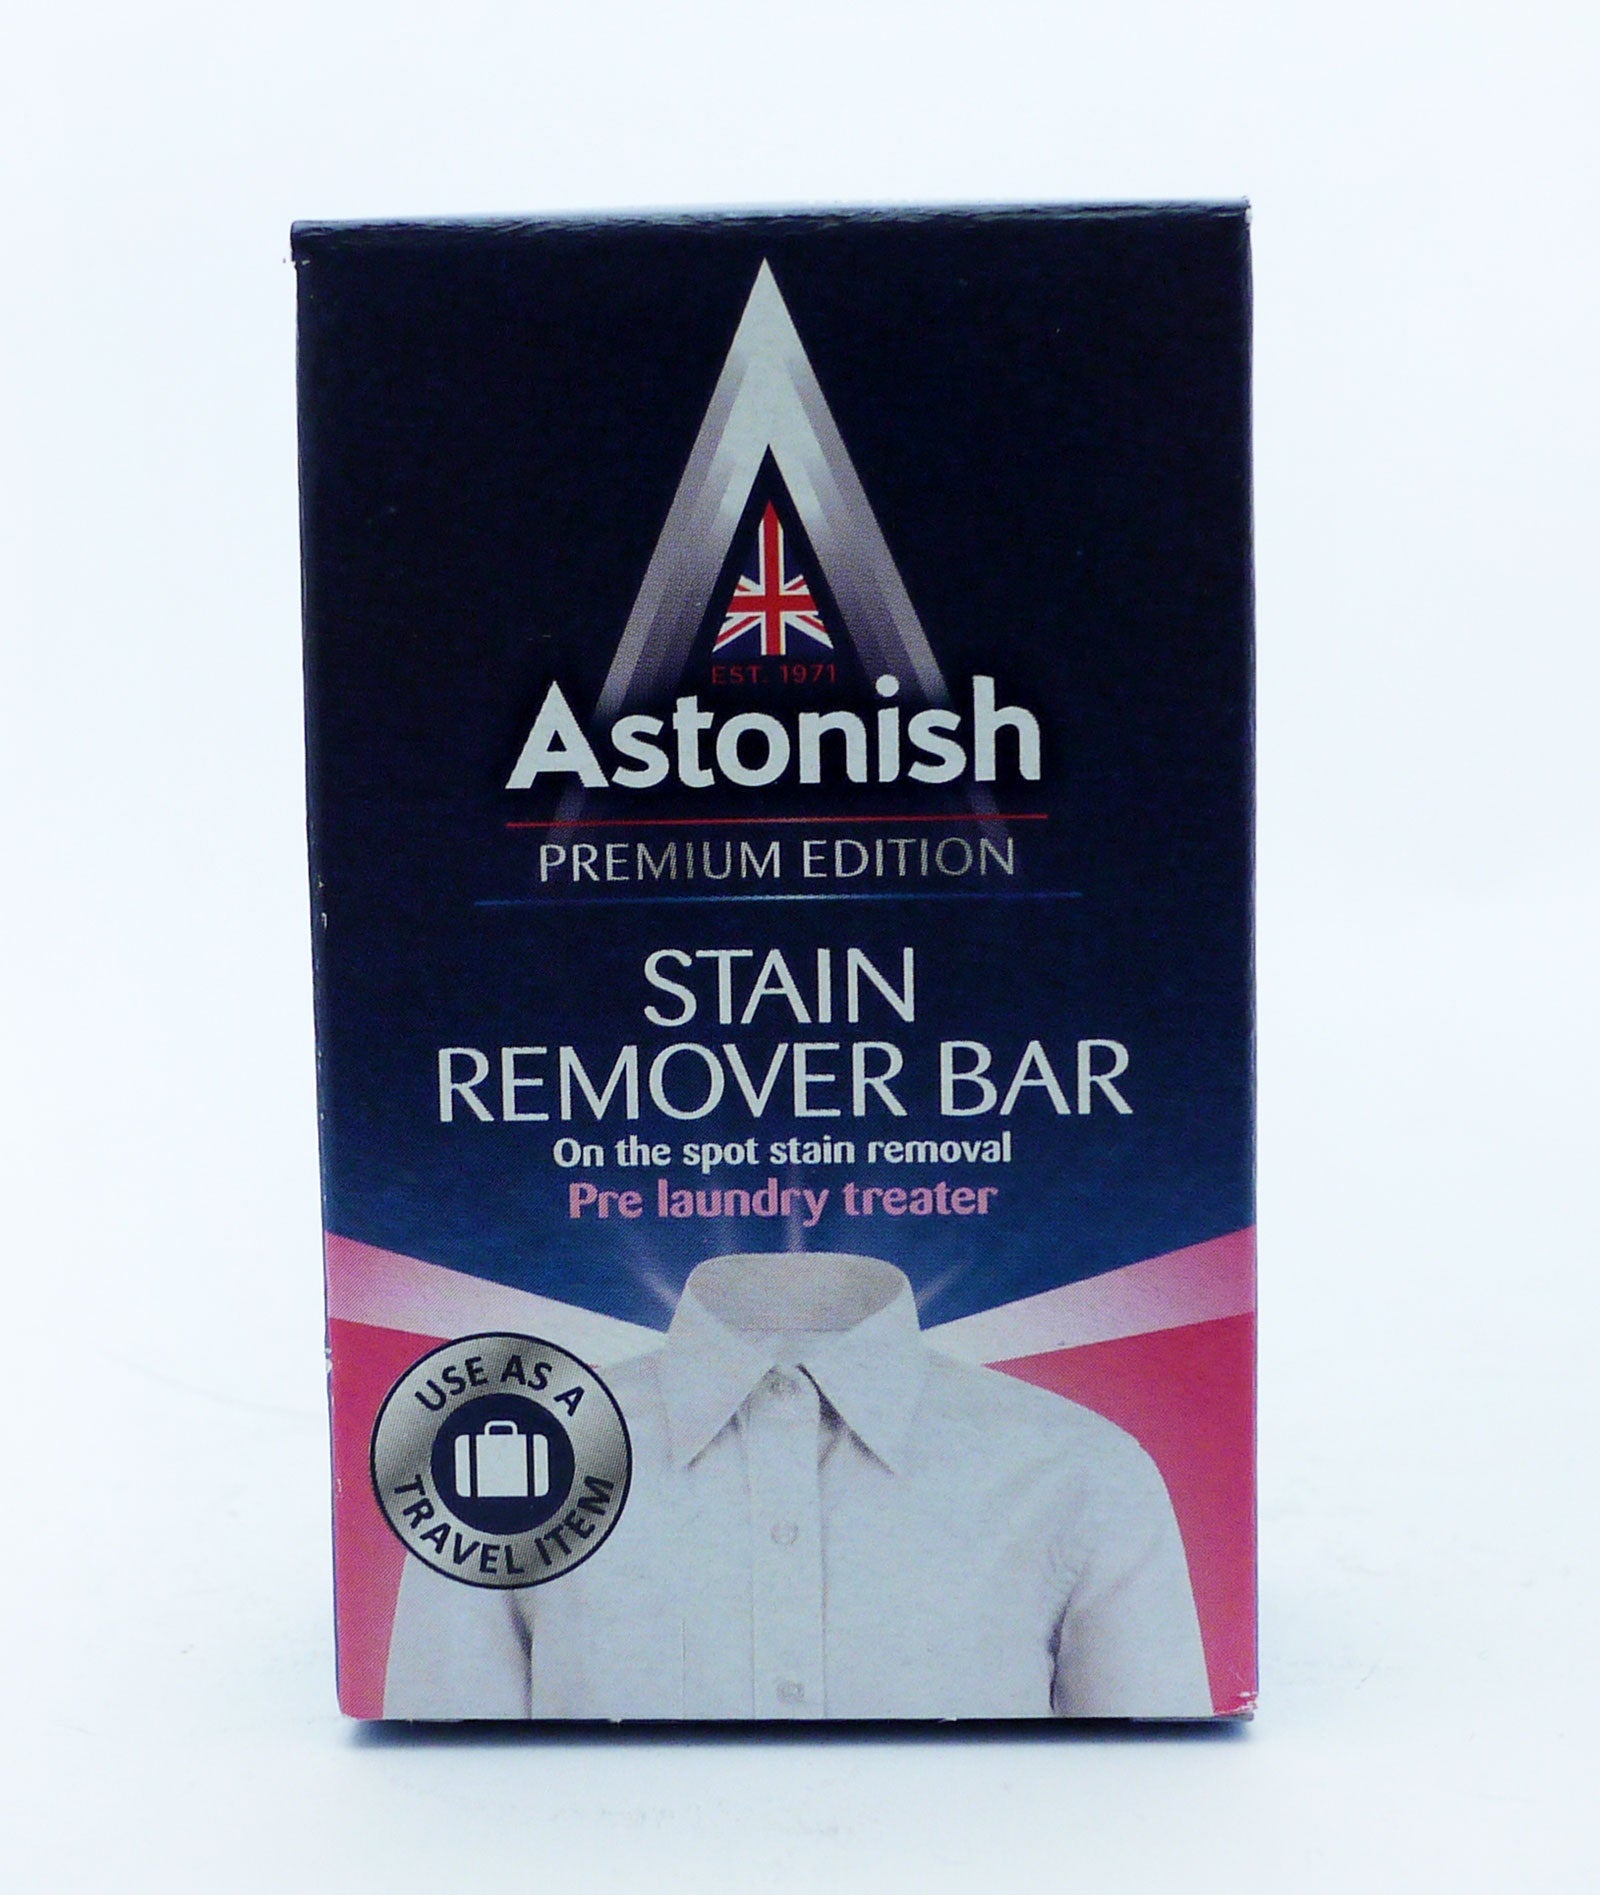 Astonish Stain Remover Bar 75g*